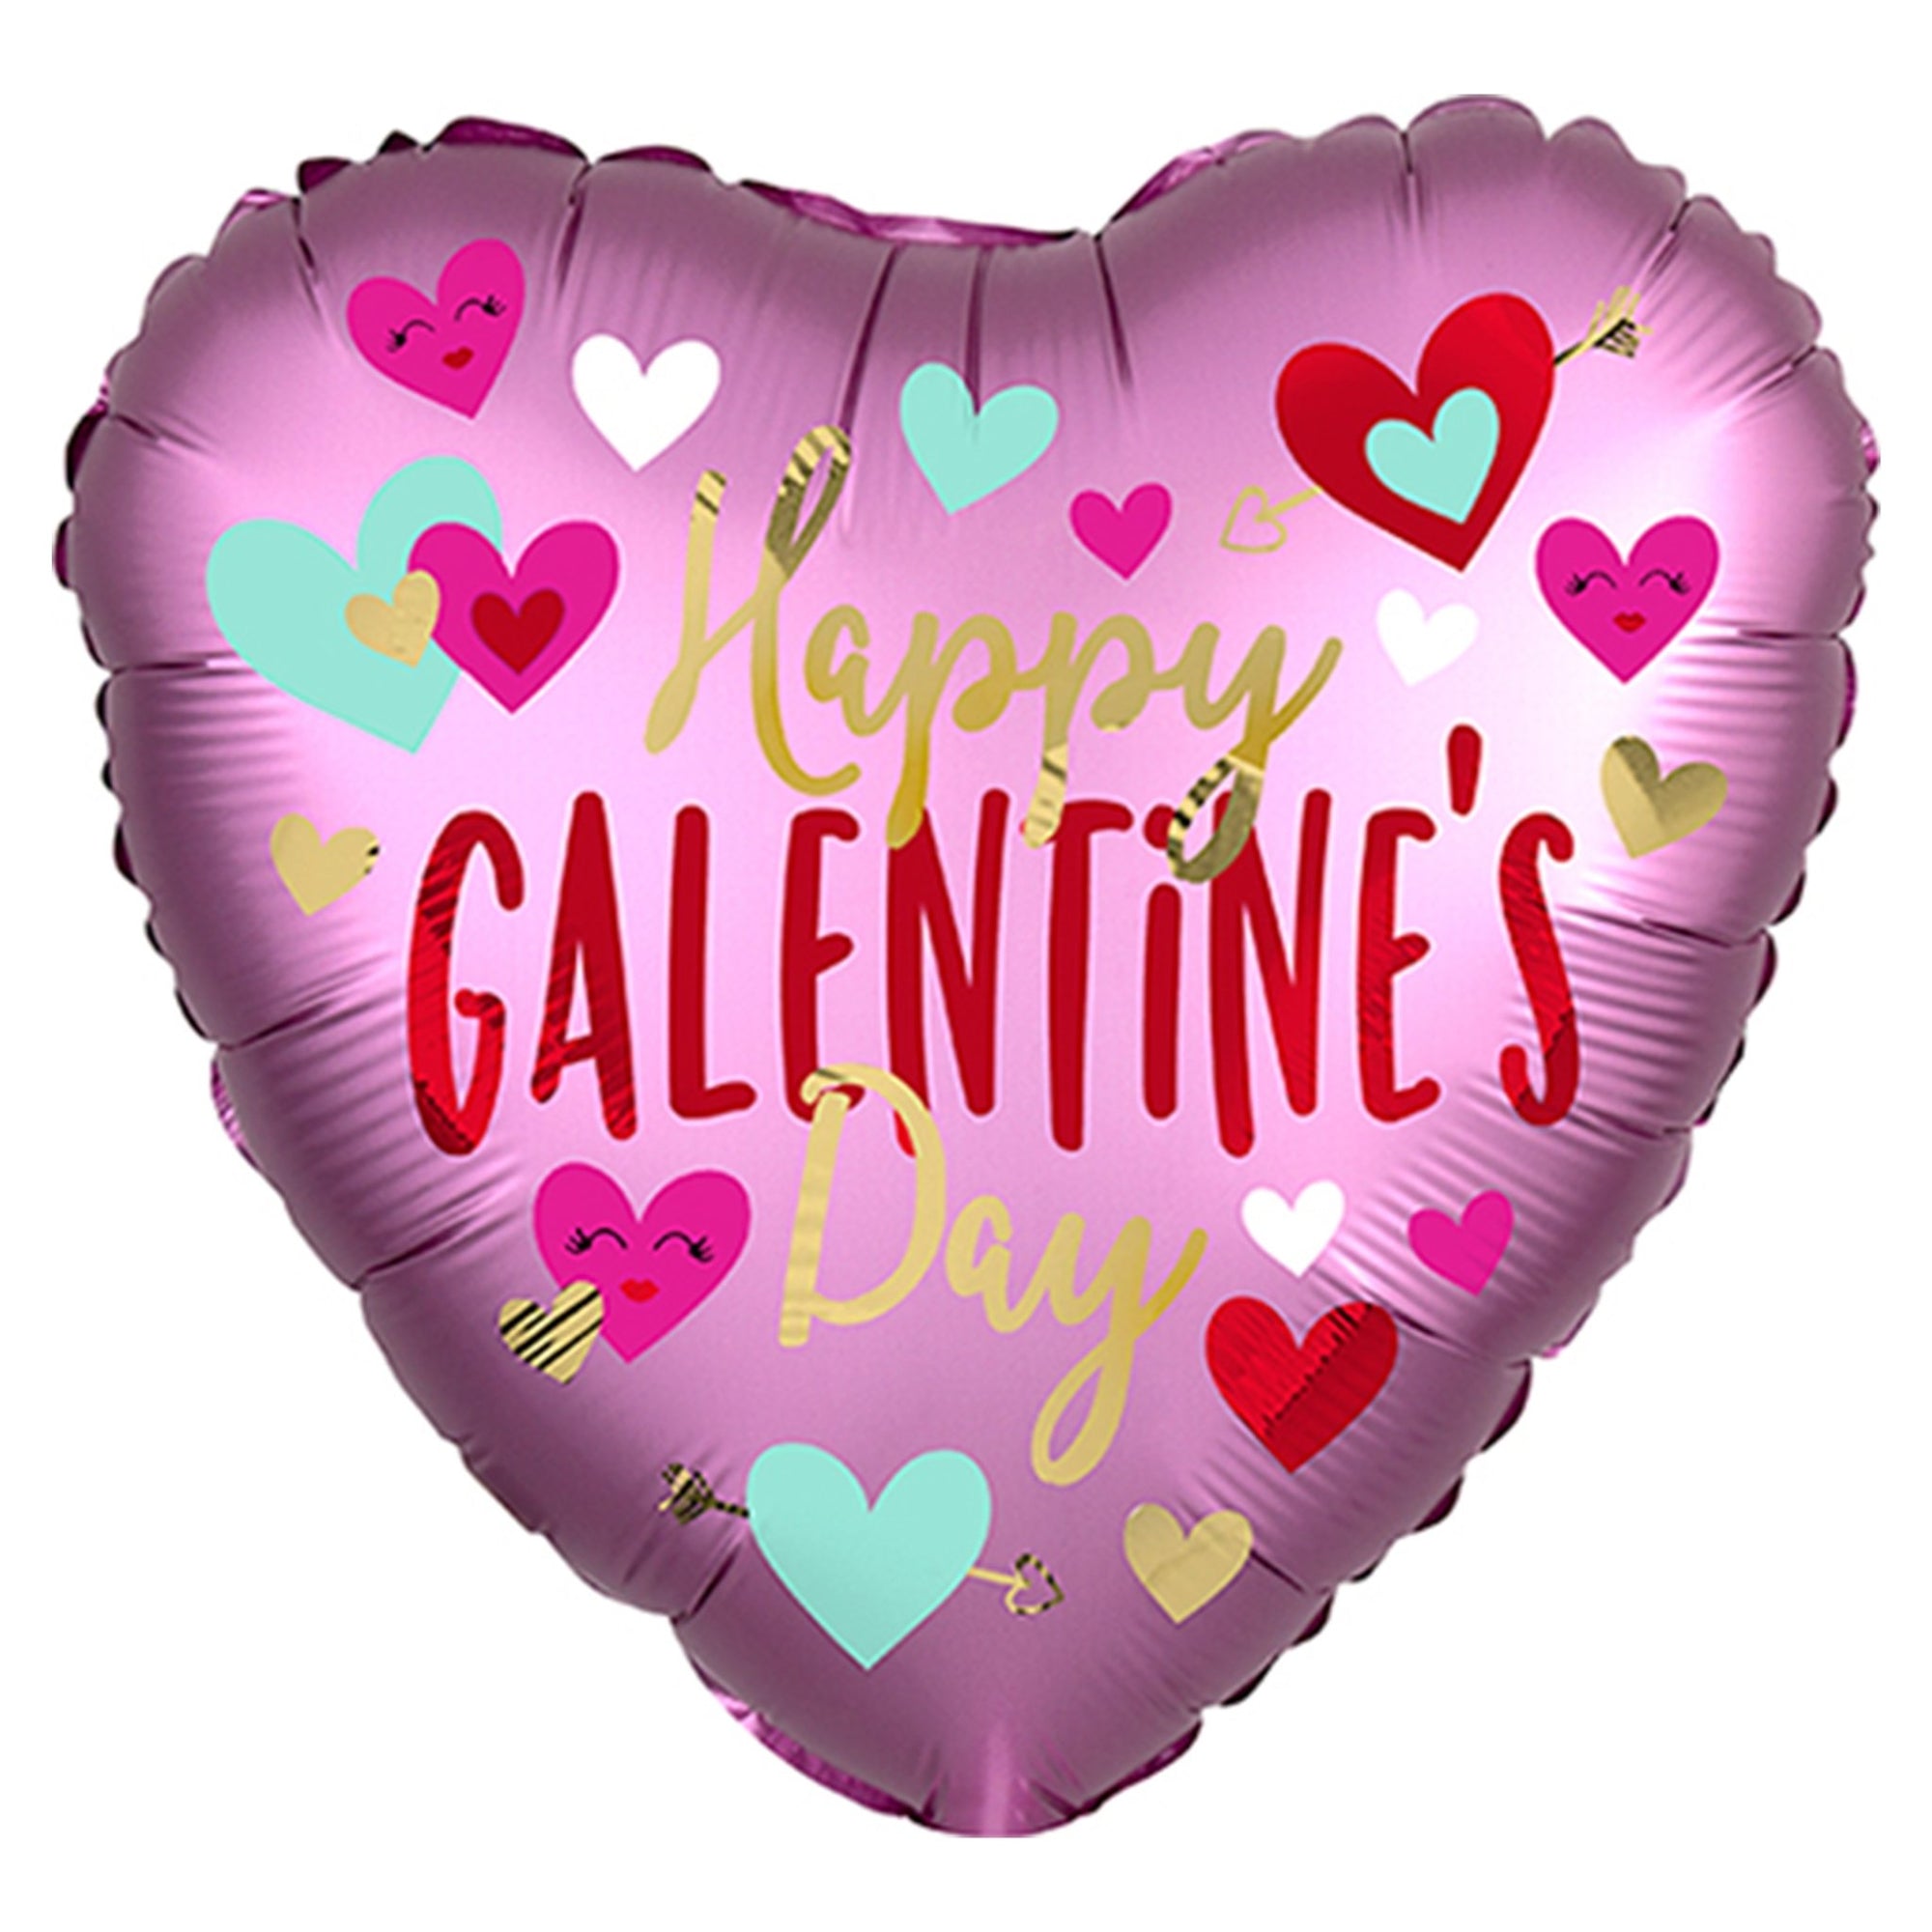 Happy Galentine's Day Heart Balloon - Pretty Collected